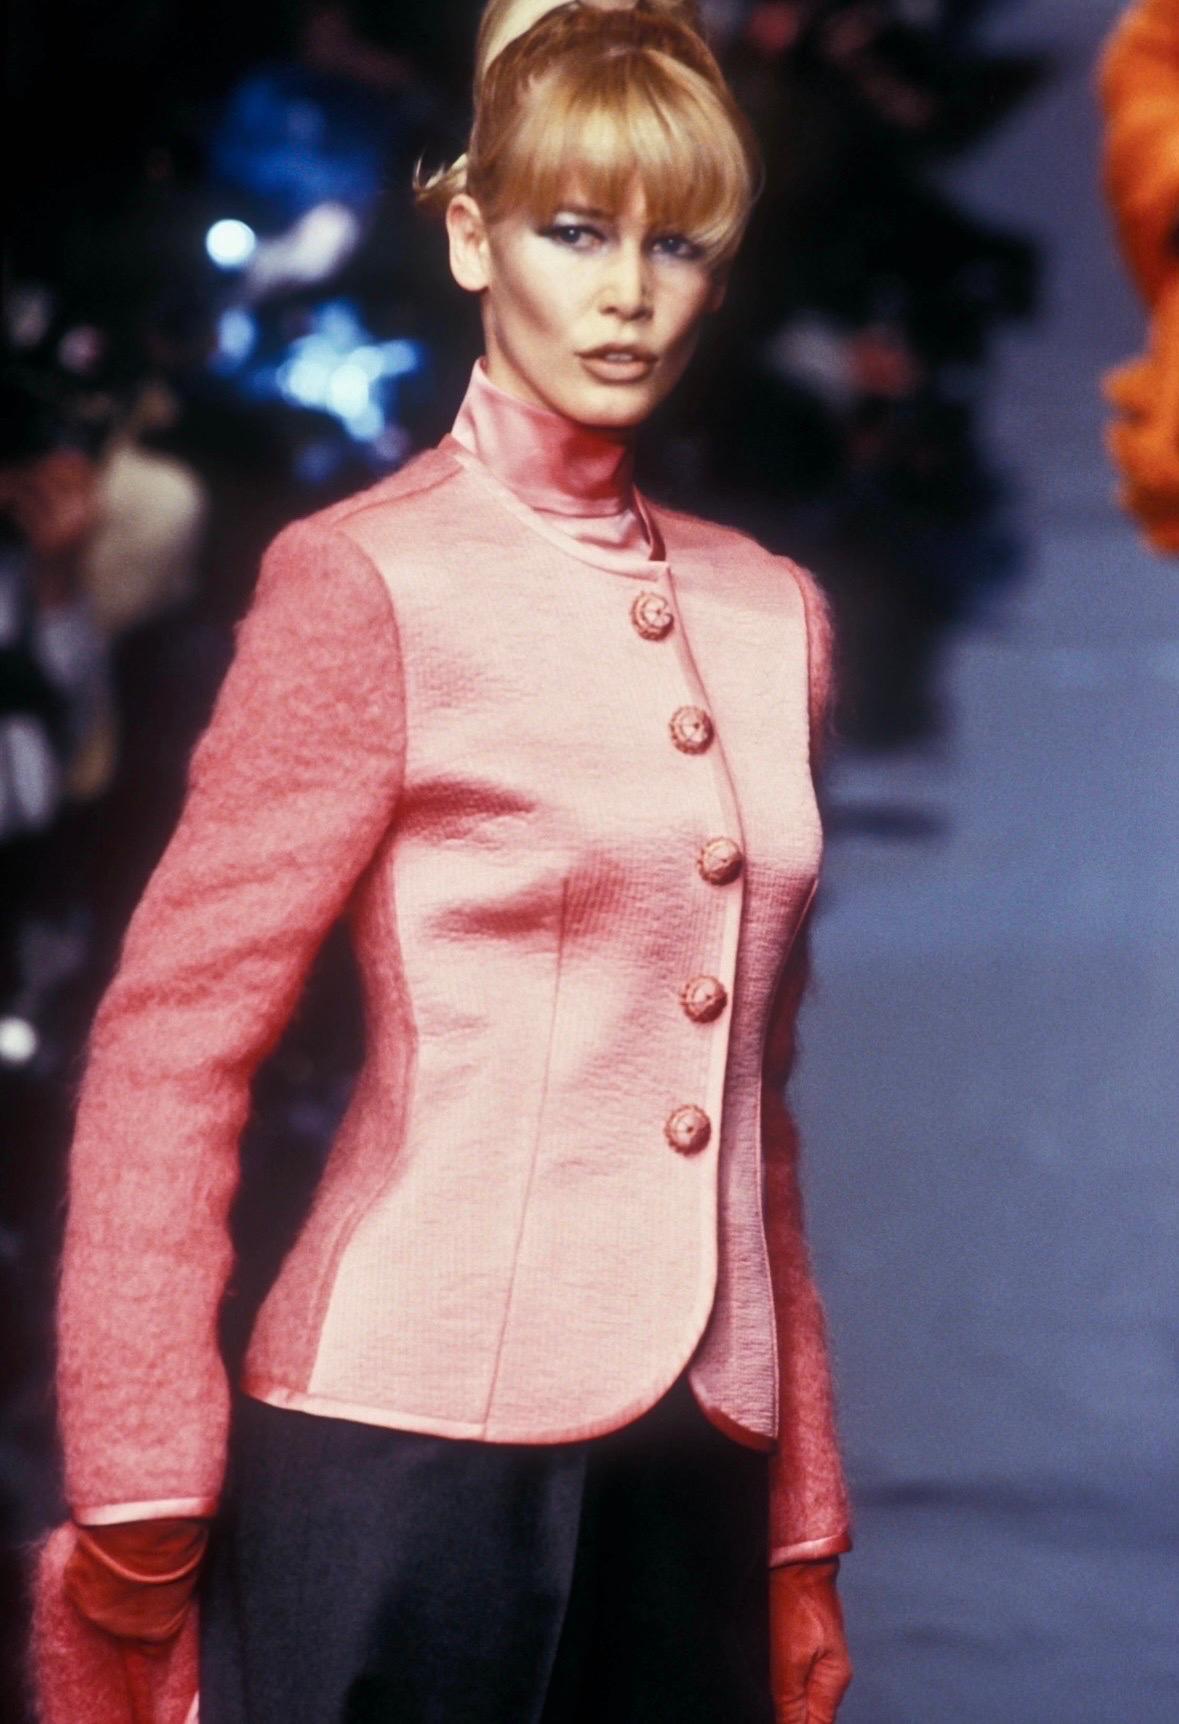 Presenting a fabulous bright pink Christian Dior Boutique jacket, designed by Gianfranco Ferré. From the Fall/Winter 1995 collection, this beautiful jacket debuted on the season's runway modeled by Claudia Schiffer. Crafted of pink mohair and silk